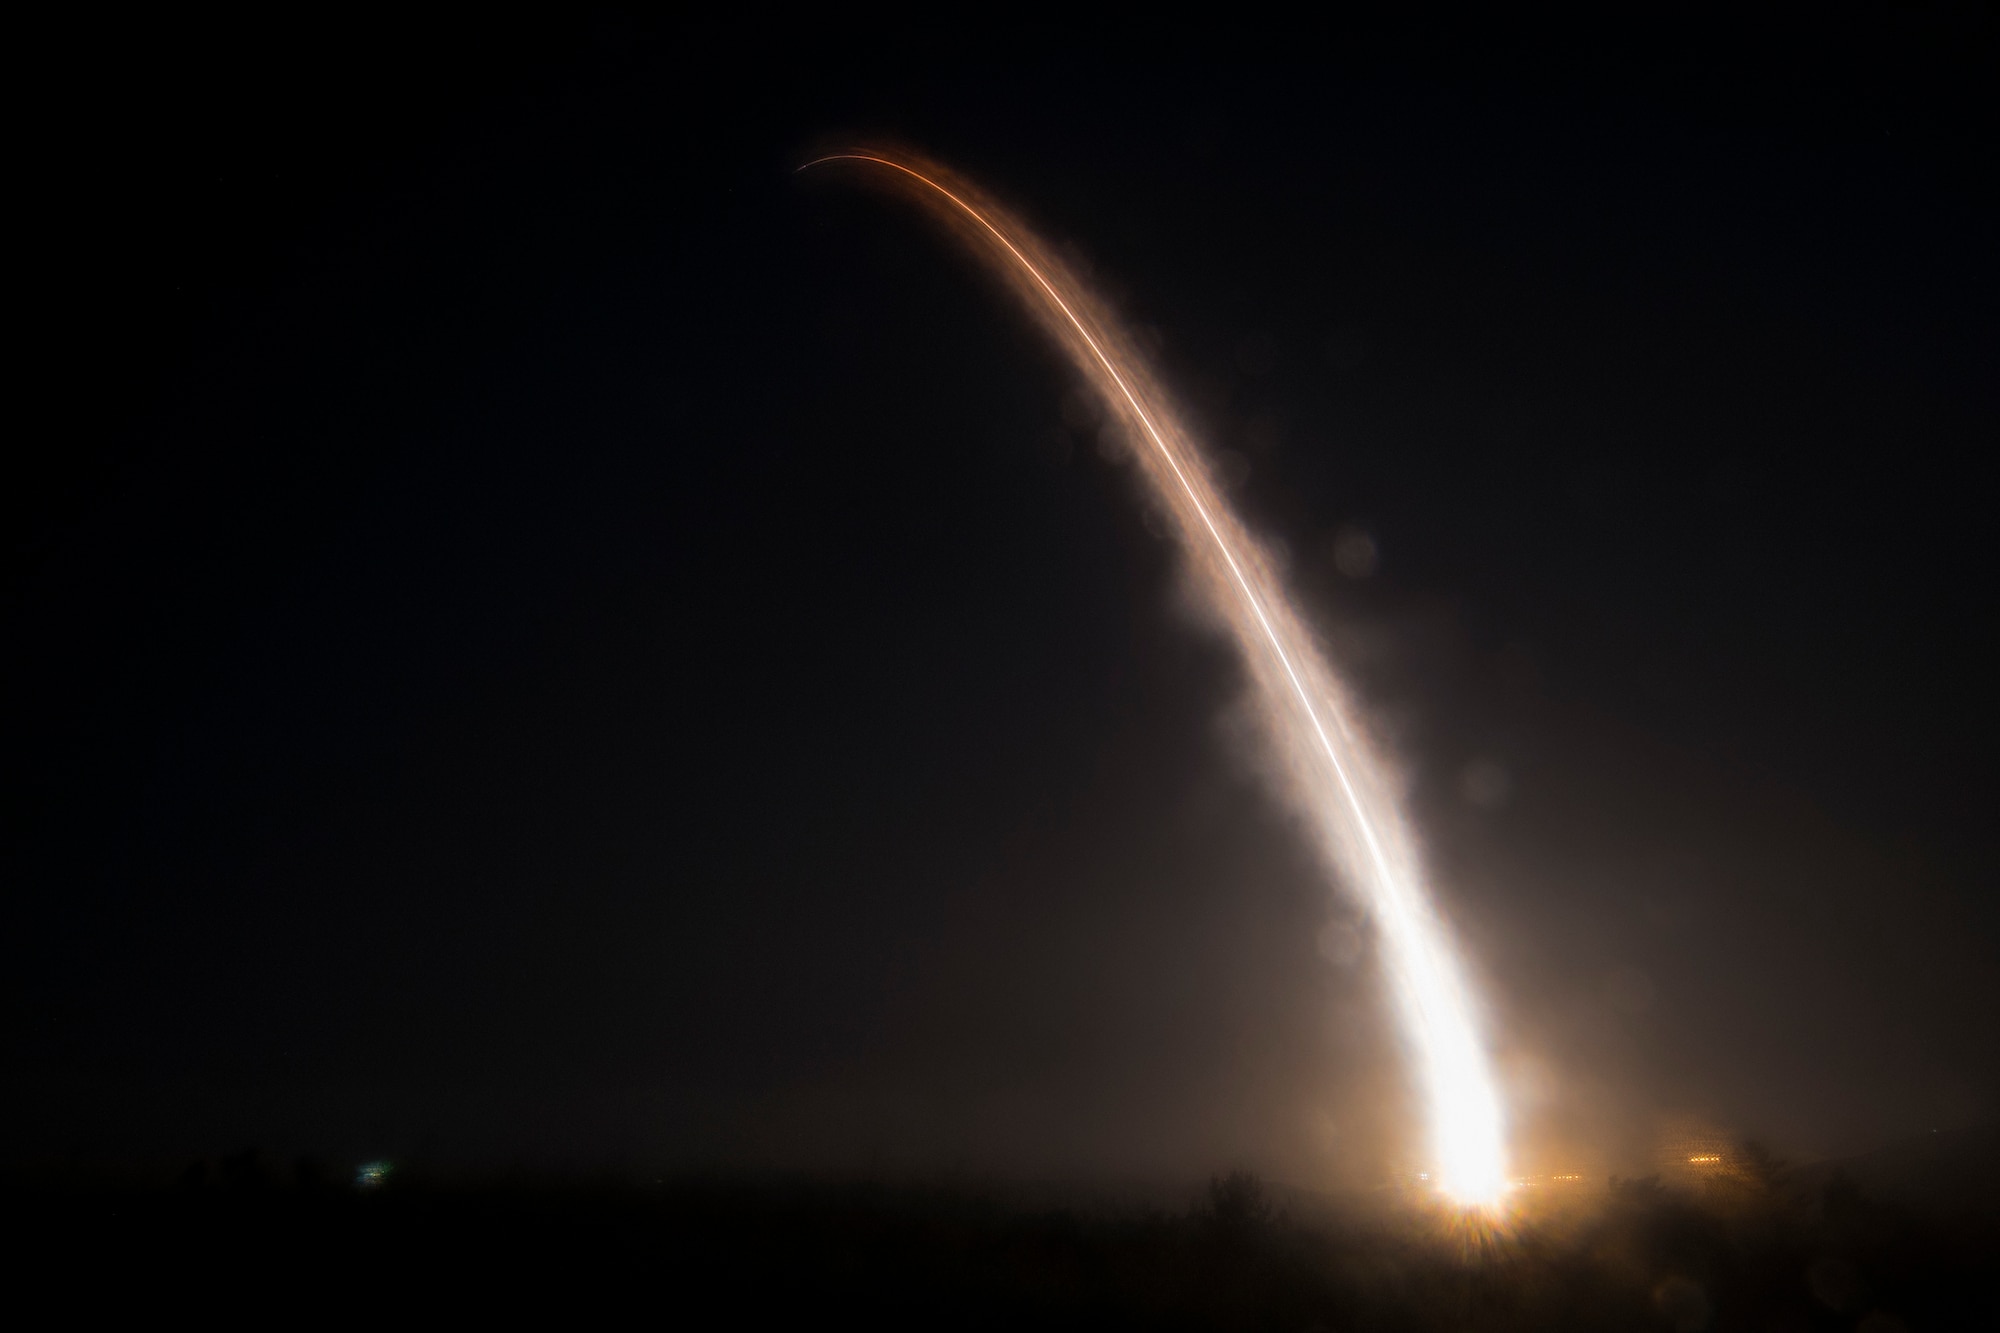 An unarmed Minuteman III intercontinental ballistic missile launches during a operational test at 2:42 A.M. Pacific Time May 1, 2019, at Vandenberg Air Force Base, Calif. (U.S. Air Force photo by Airman 1st Class Aubree Milks)